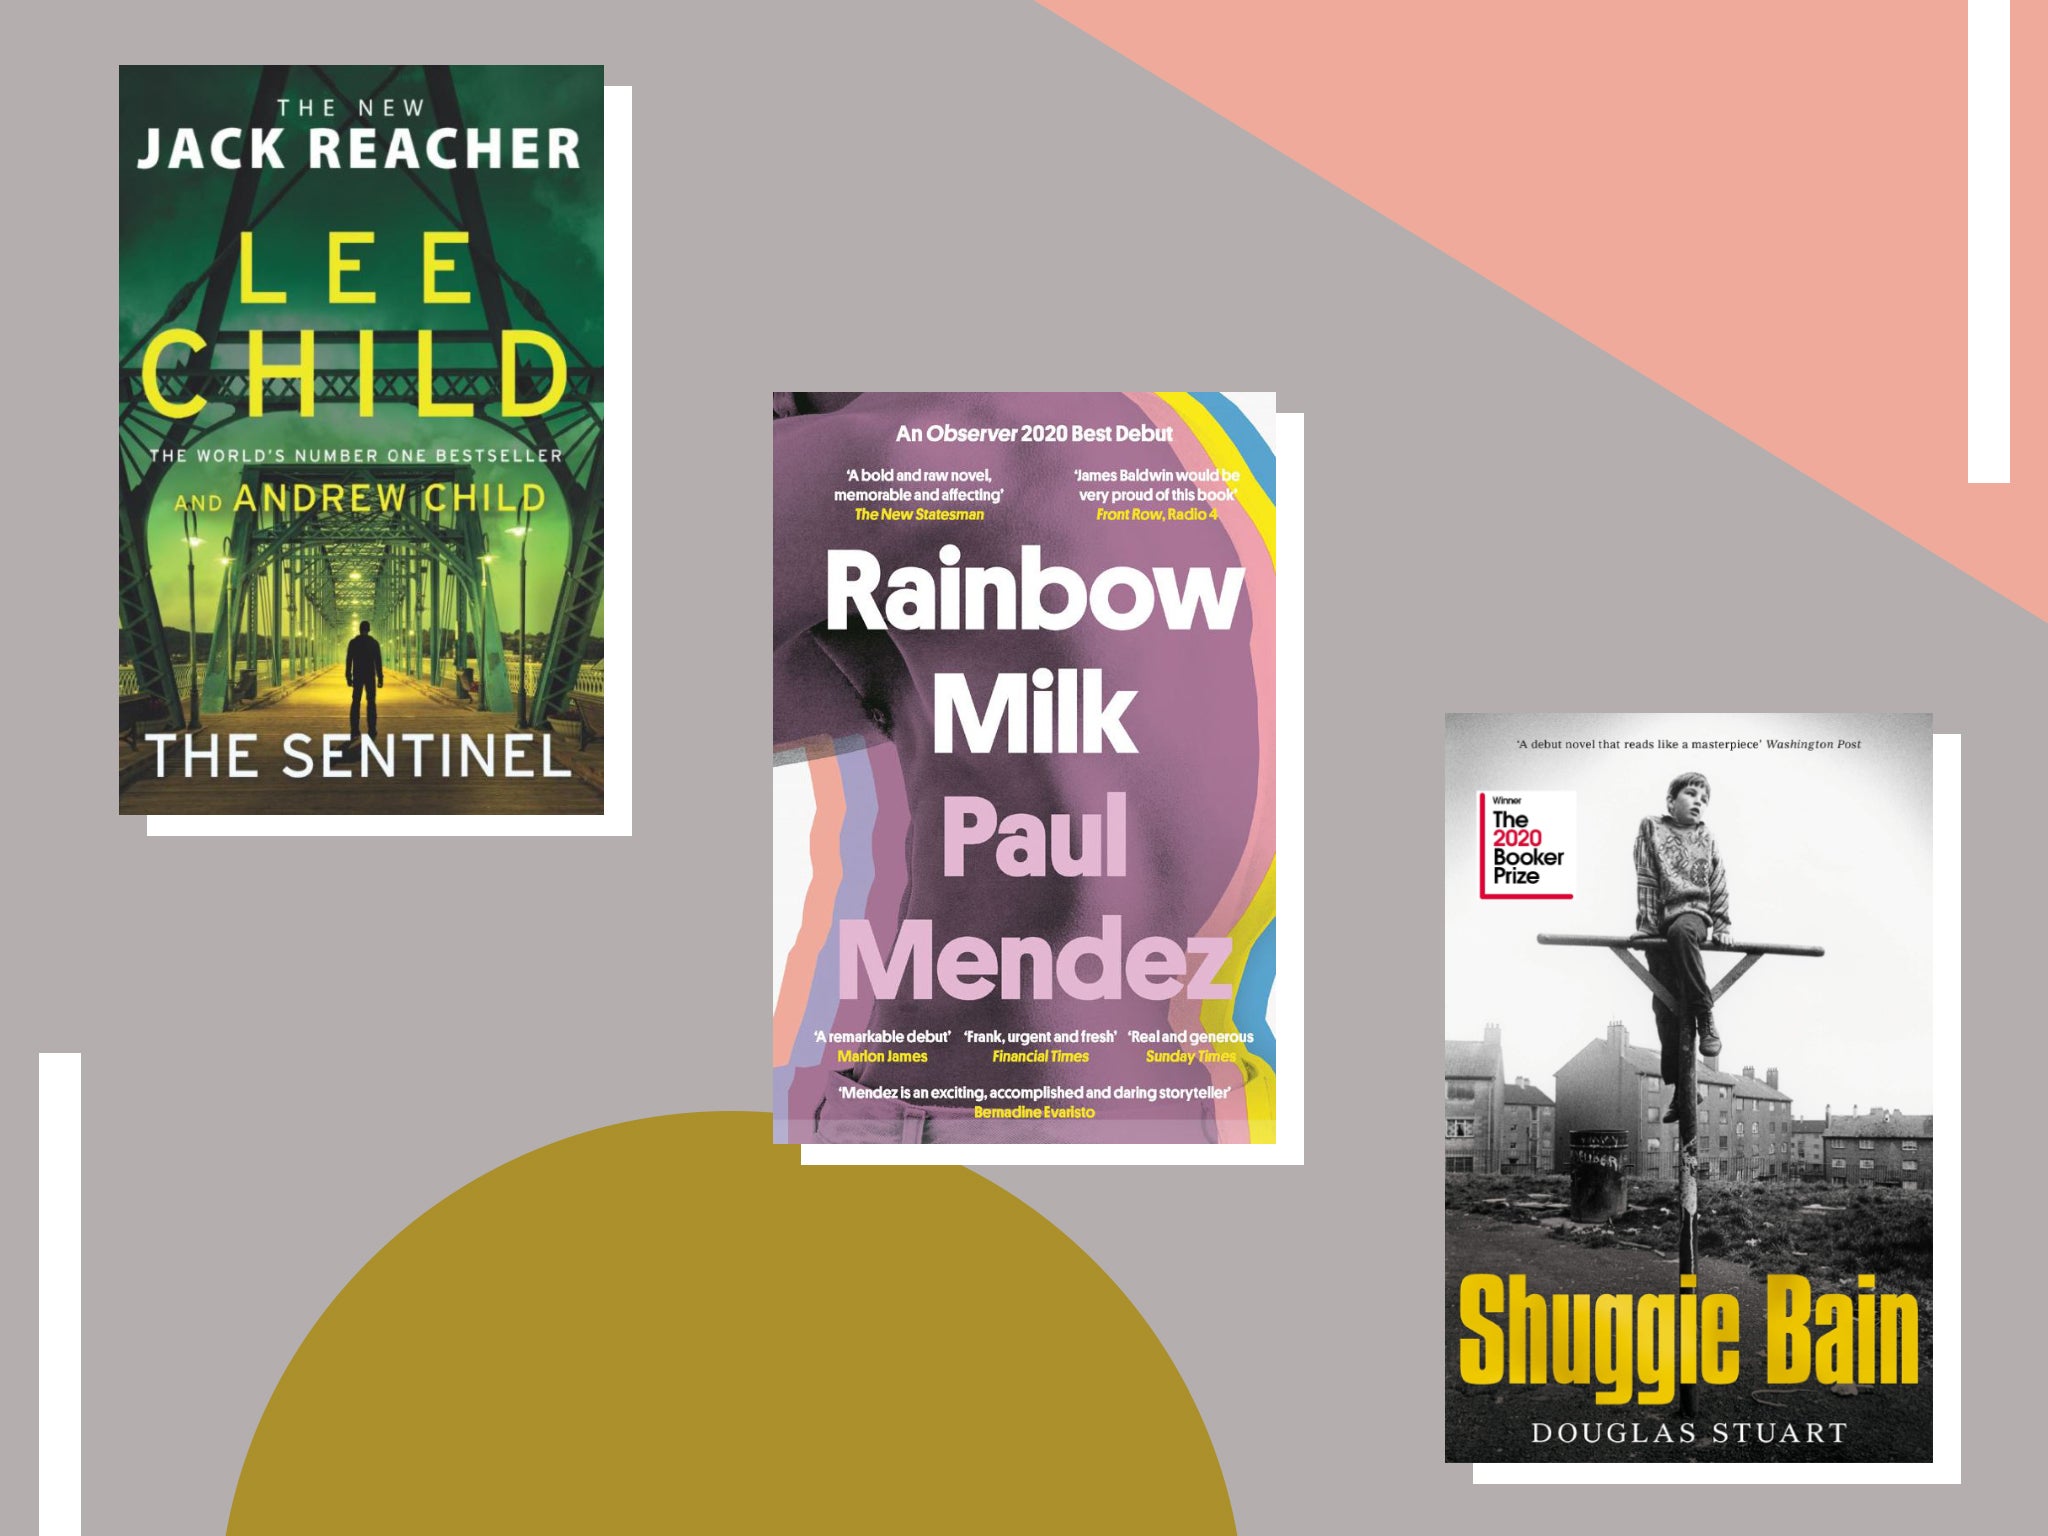 Whether you’re partial to fiction or non-fiction, there’s something for everyone here